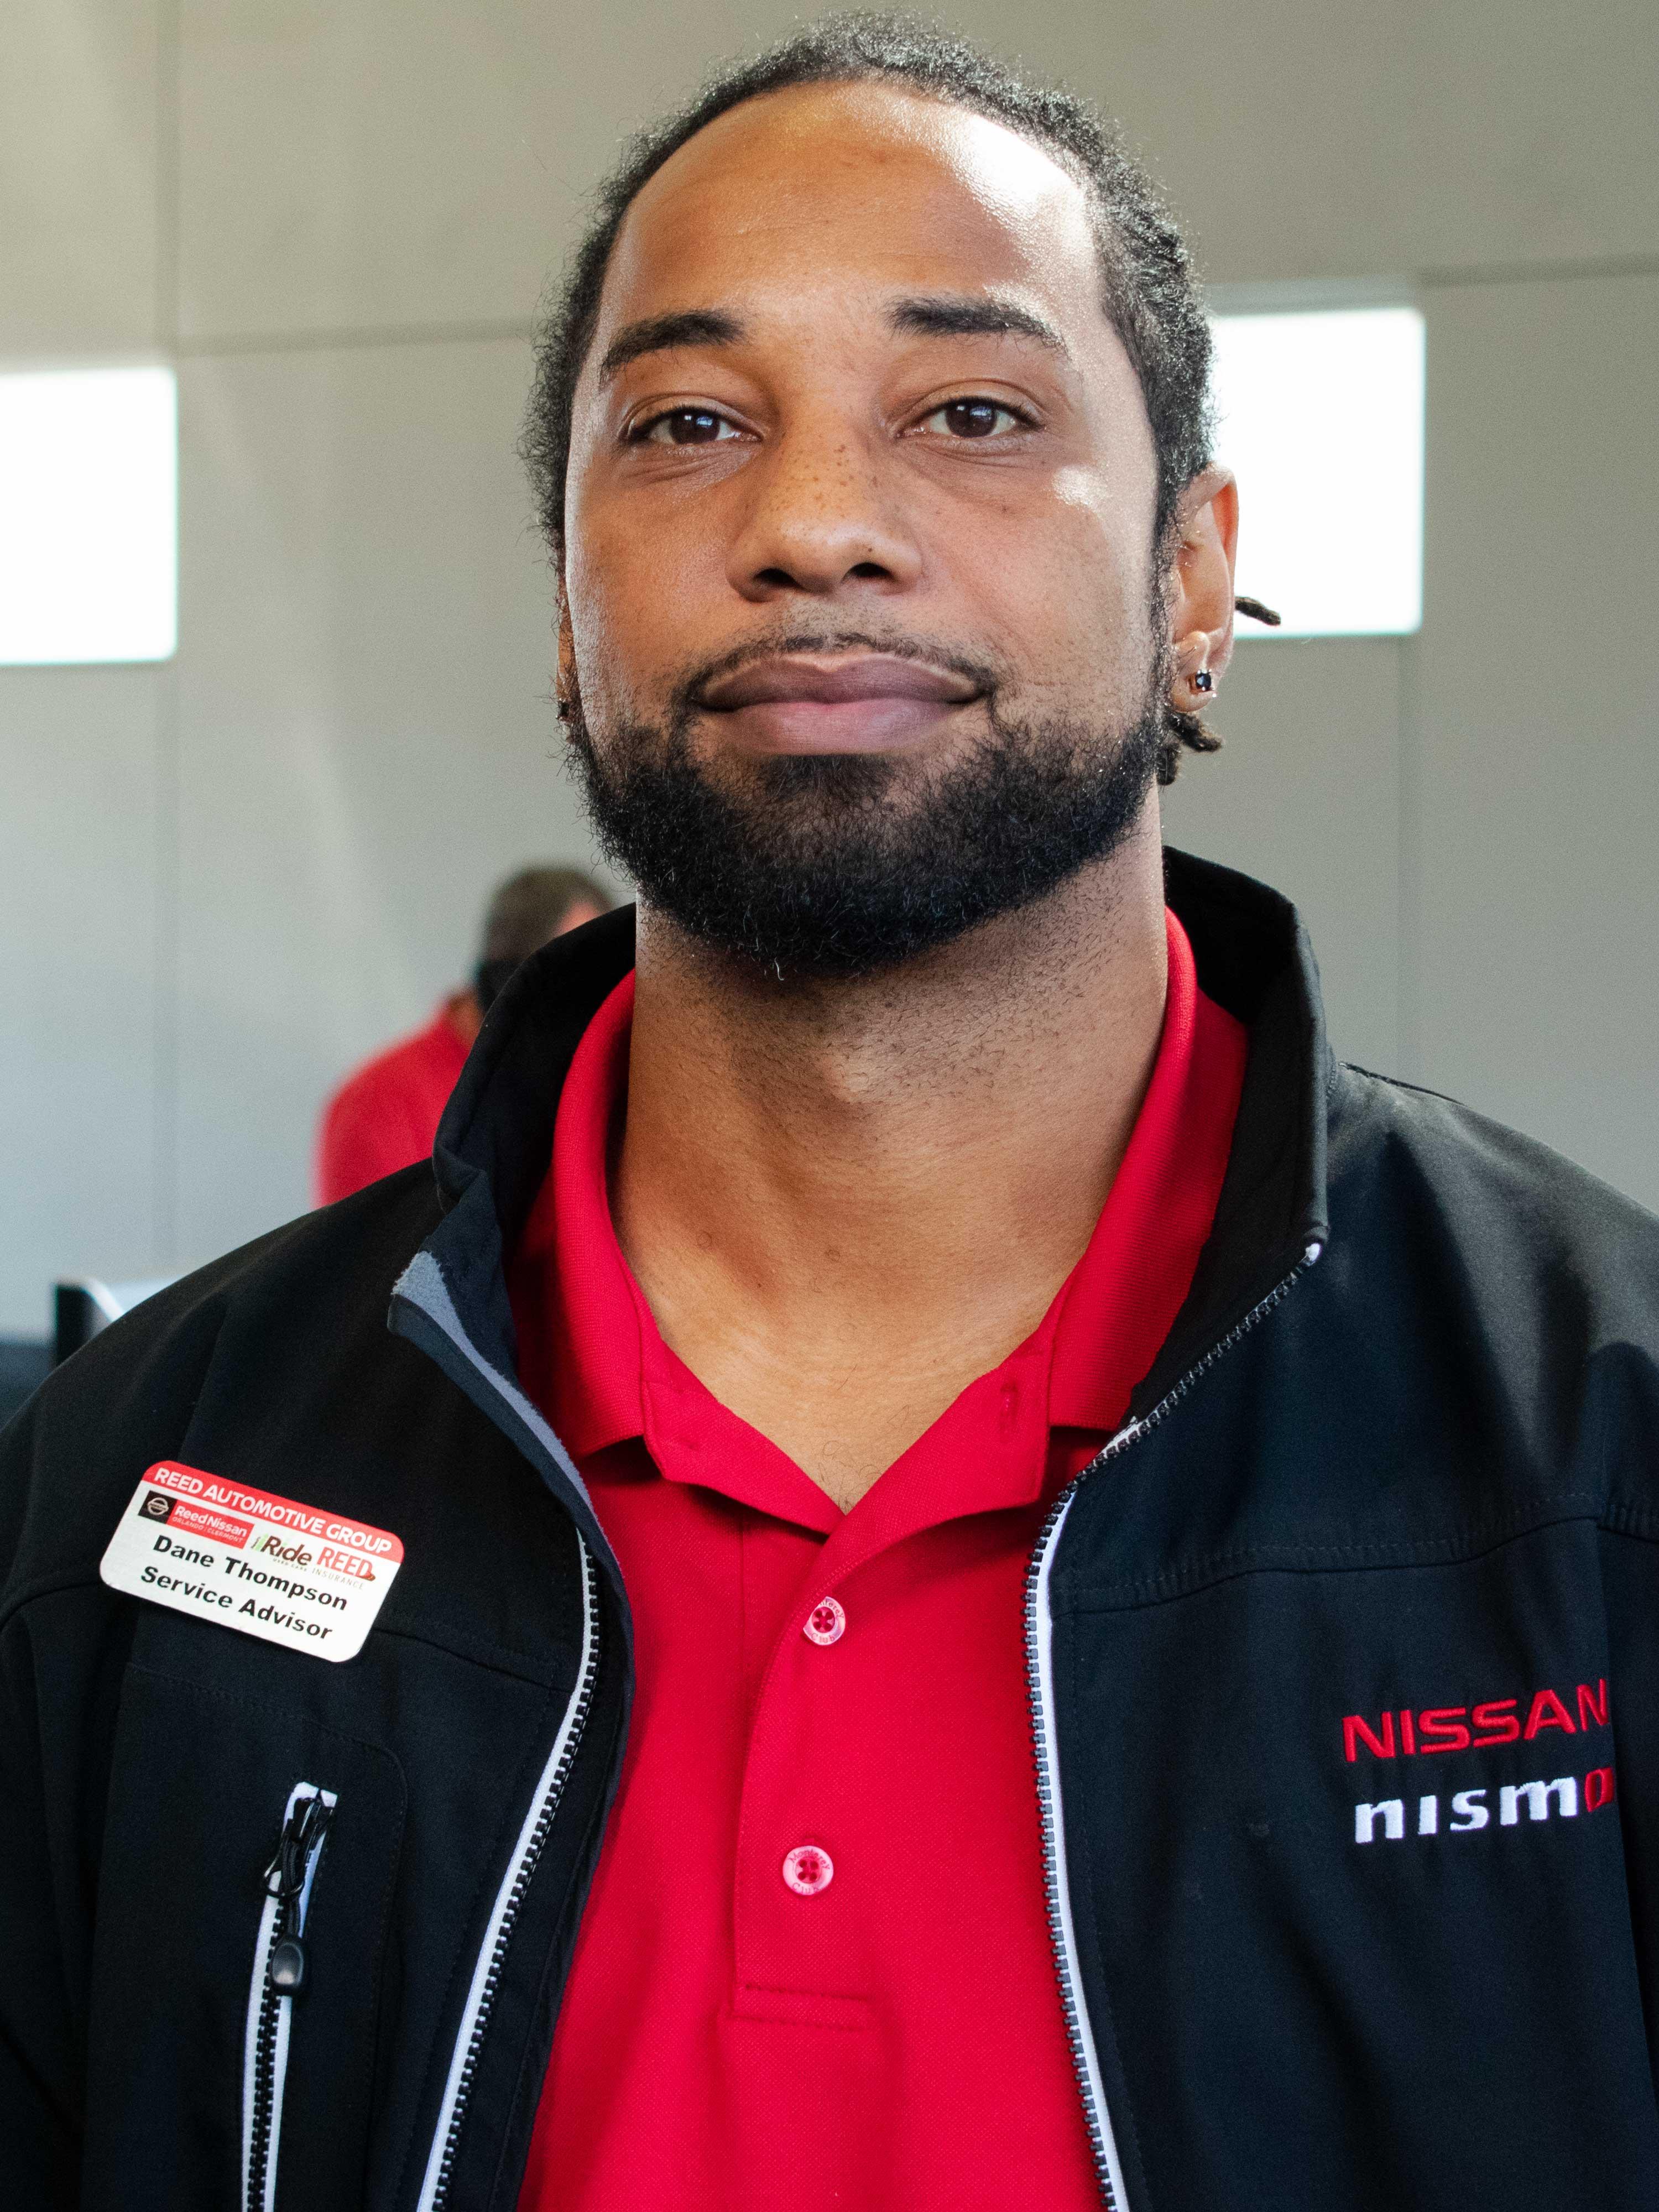 Reed Nissan Orlando is a Orlando Nissan dealer and a new car and used